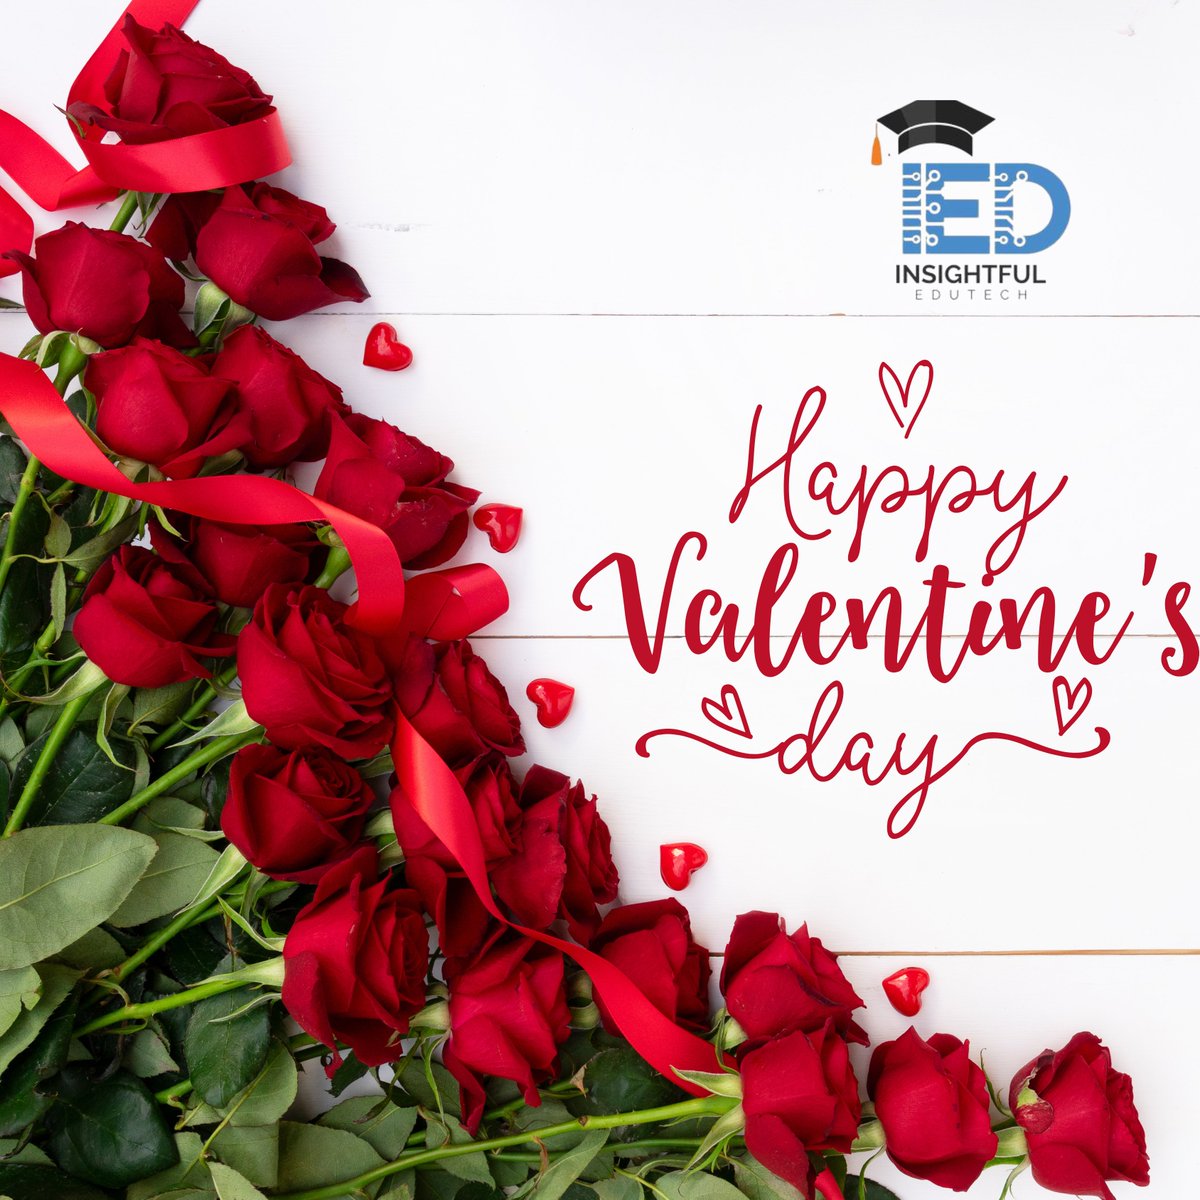 Happy Valentine's Day to the insightful minds at Insightful Edutech! May this day be filled with love for learning, appreciation for knowledge, and a deep understanding of the transformative power of education. #ValentinesDay #EducationLove #insightfuledutech #loveisintheair